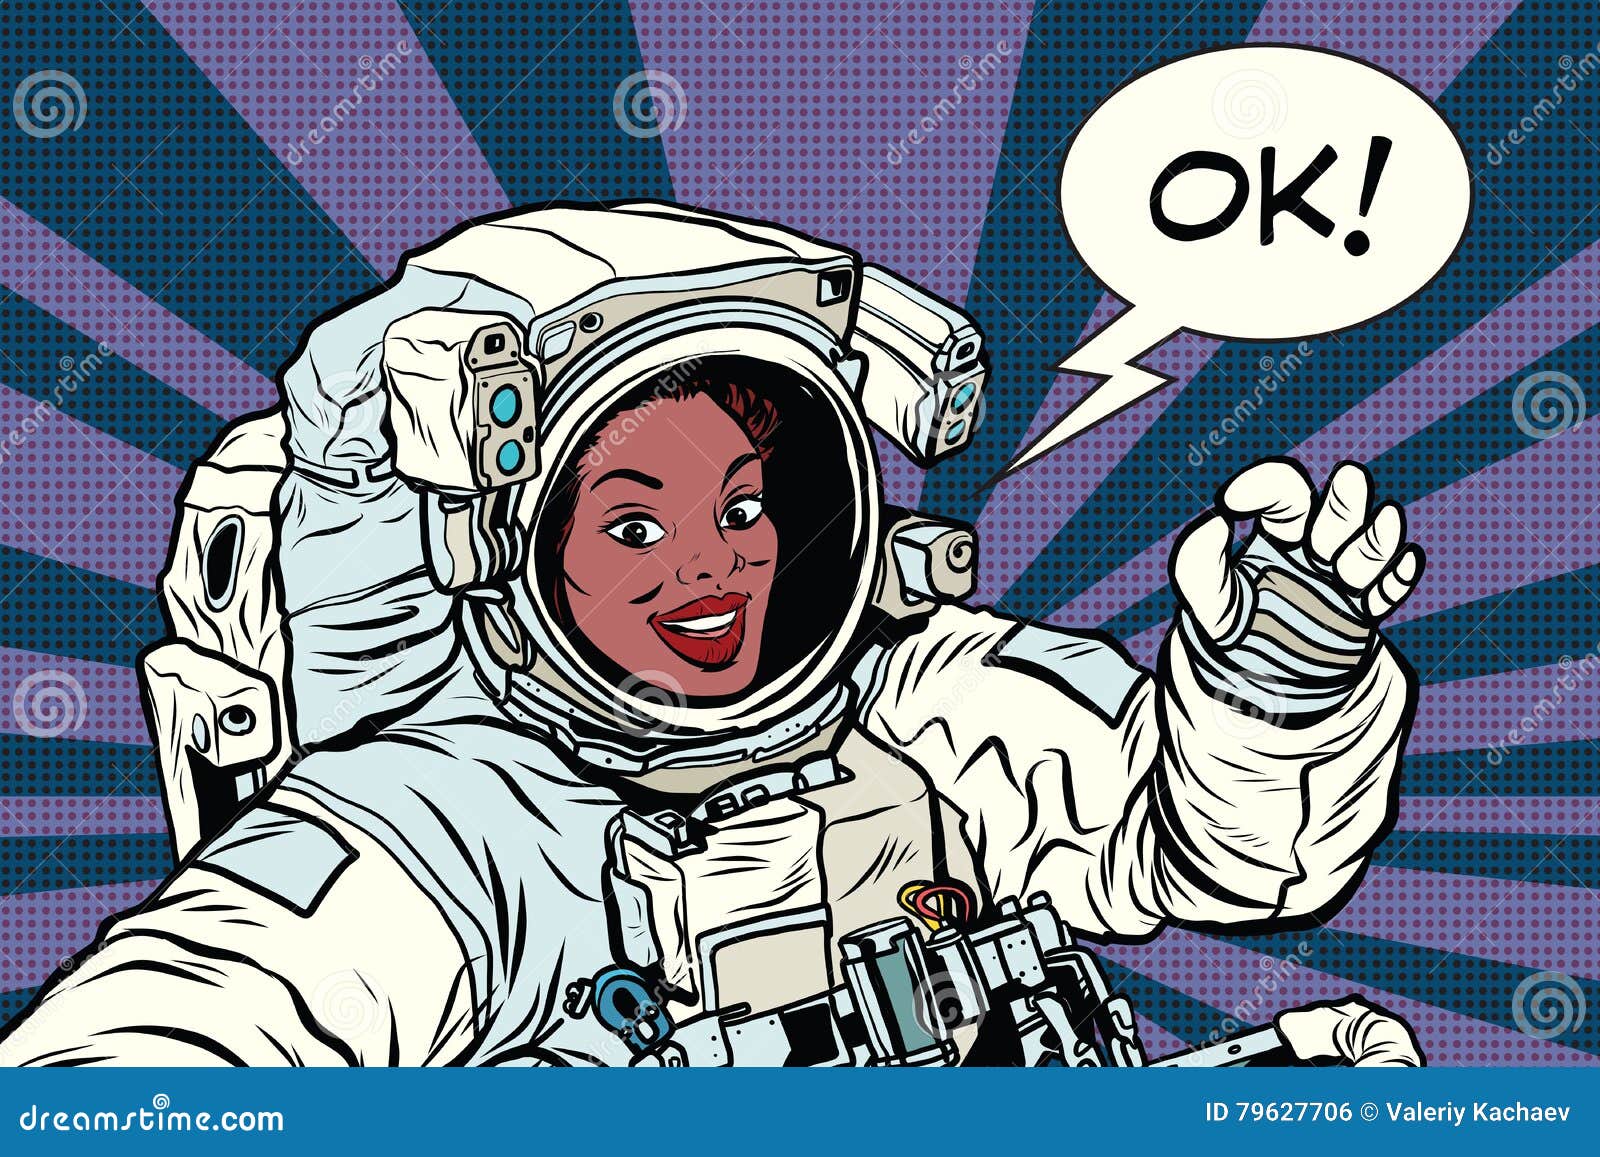 ok gesture woman astronaut in a spacesuit